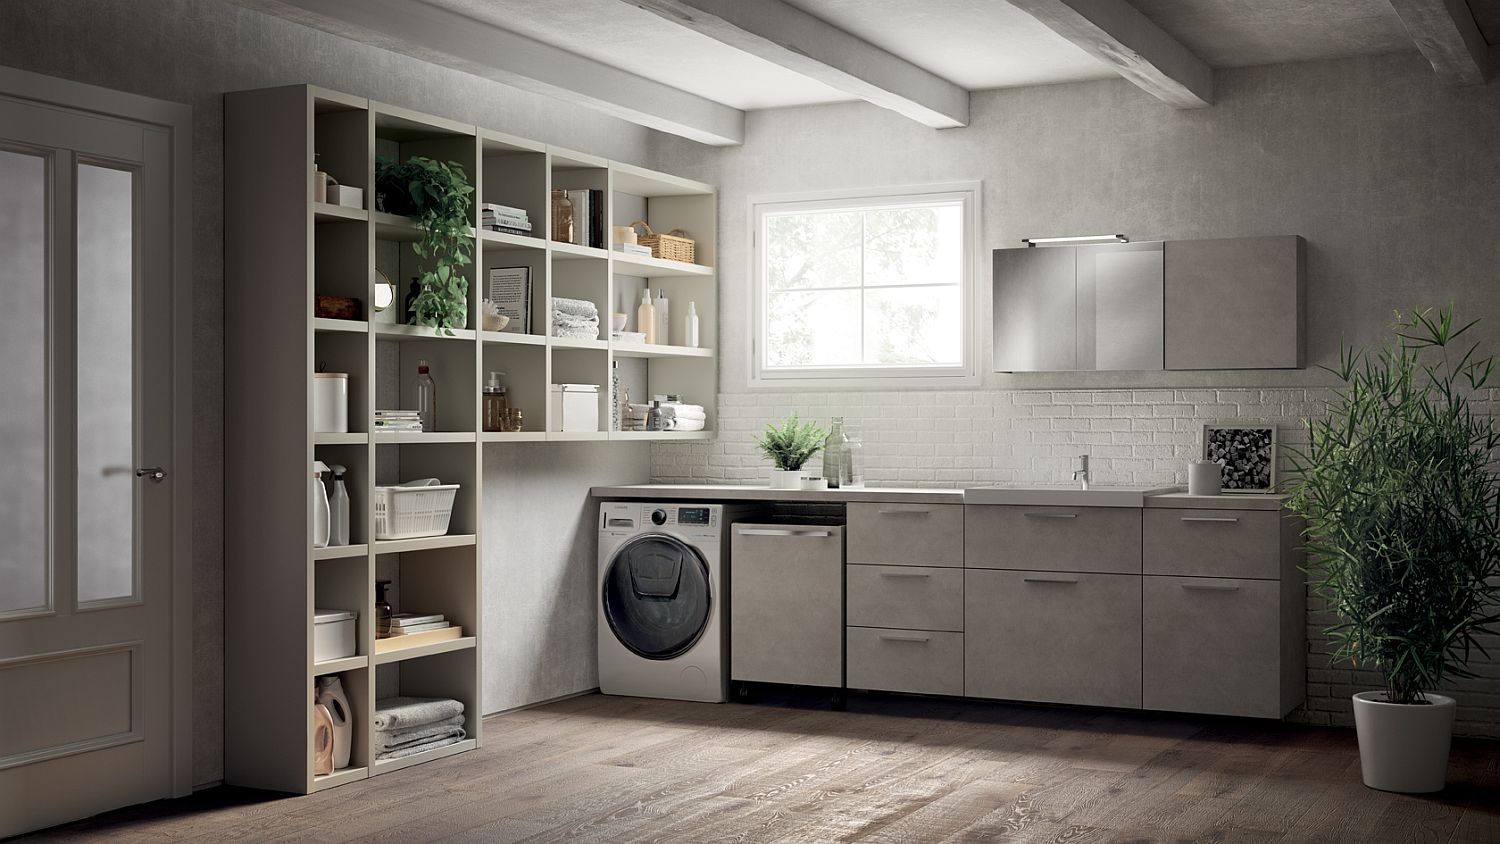 Fluida wall system combined with refined bathroom setting and smart laundry space